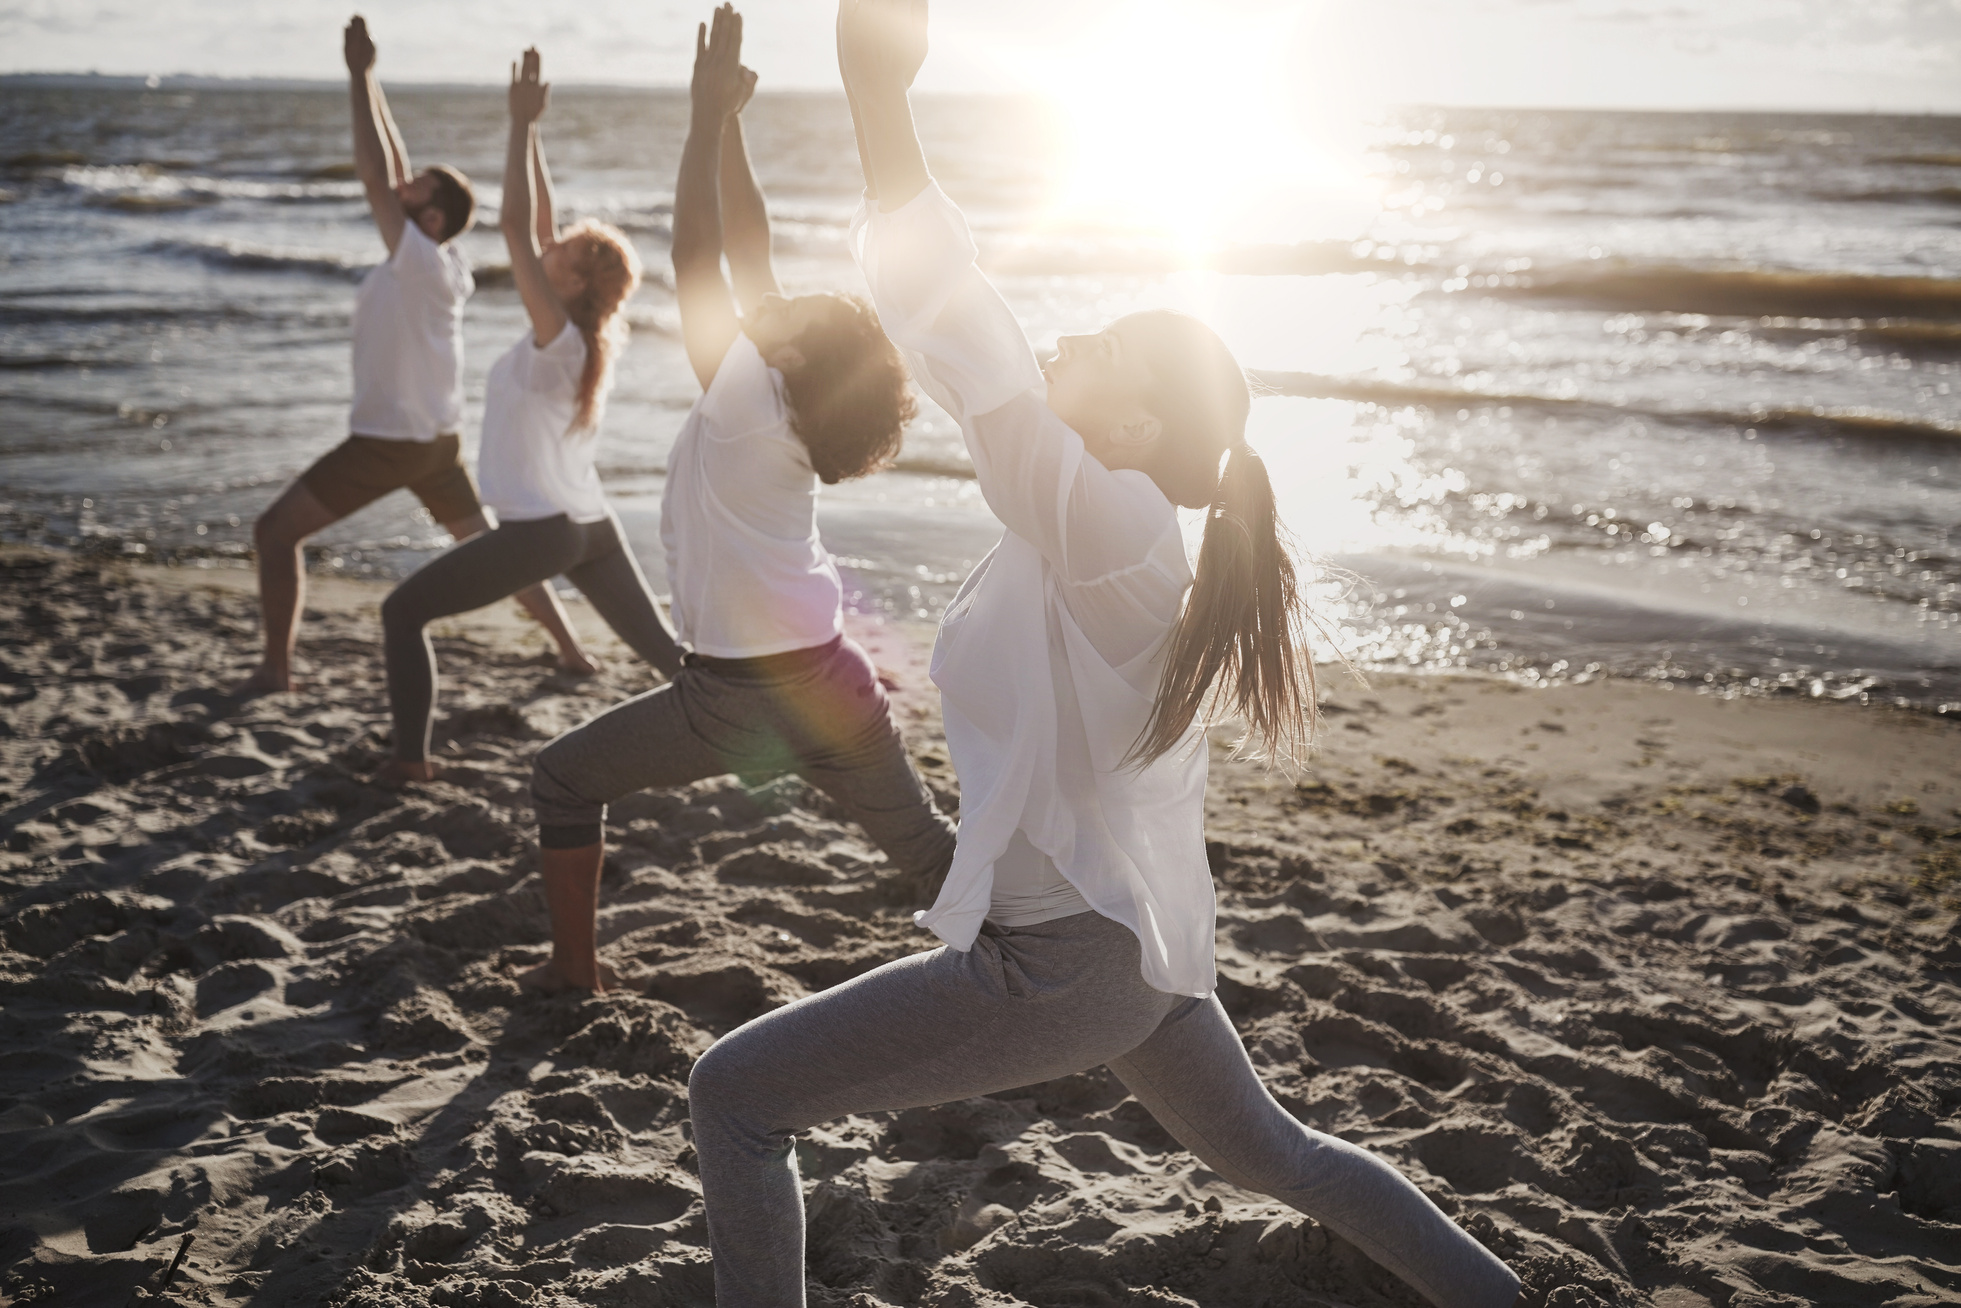 Group of People Making Yoga Exercises on Beach